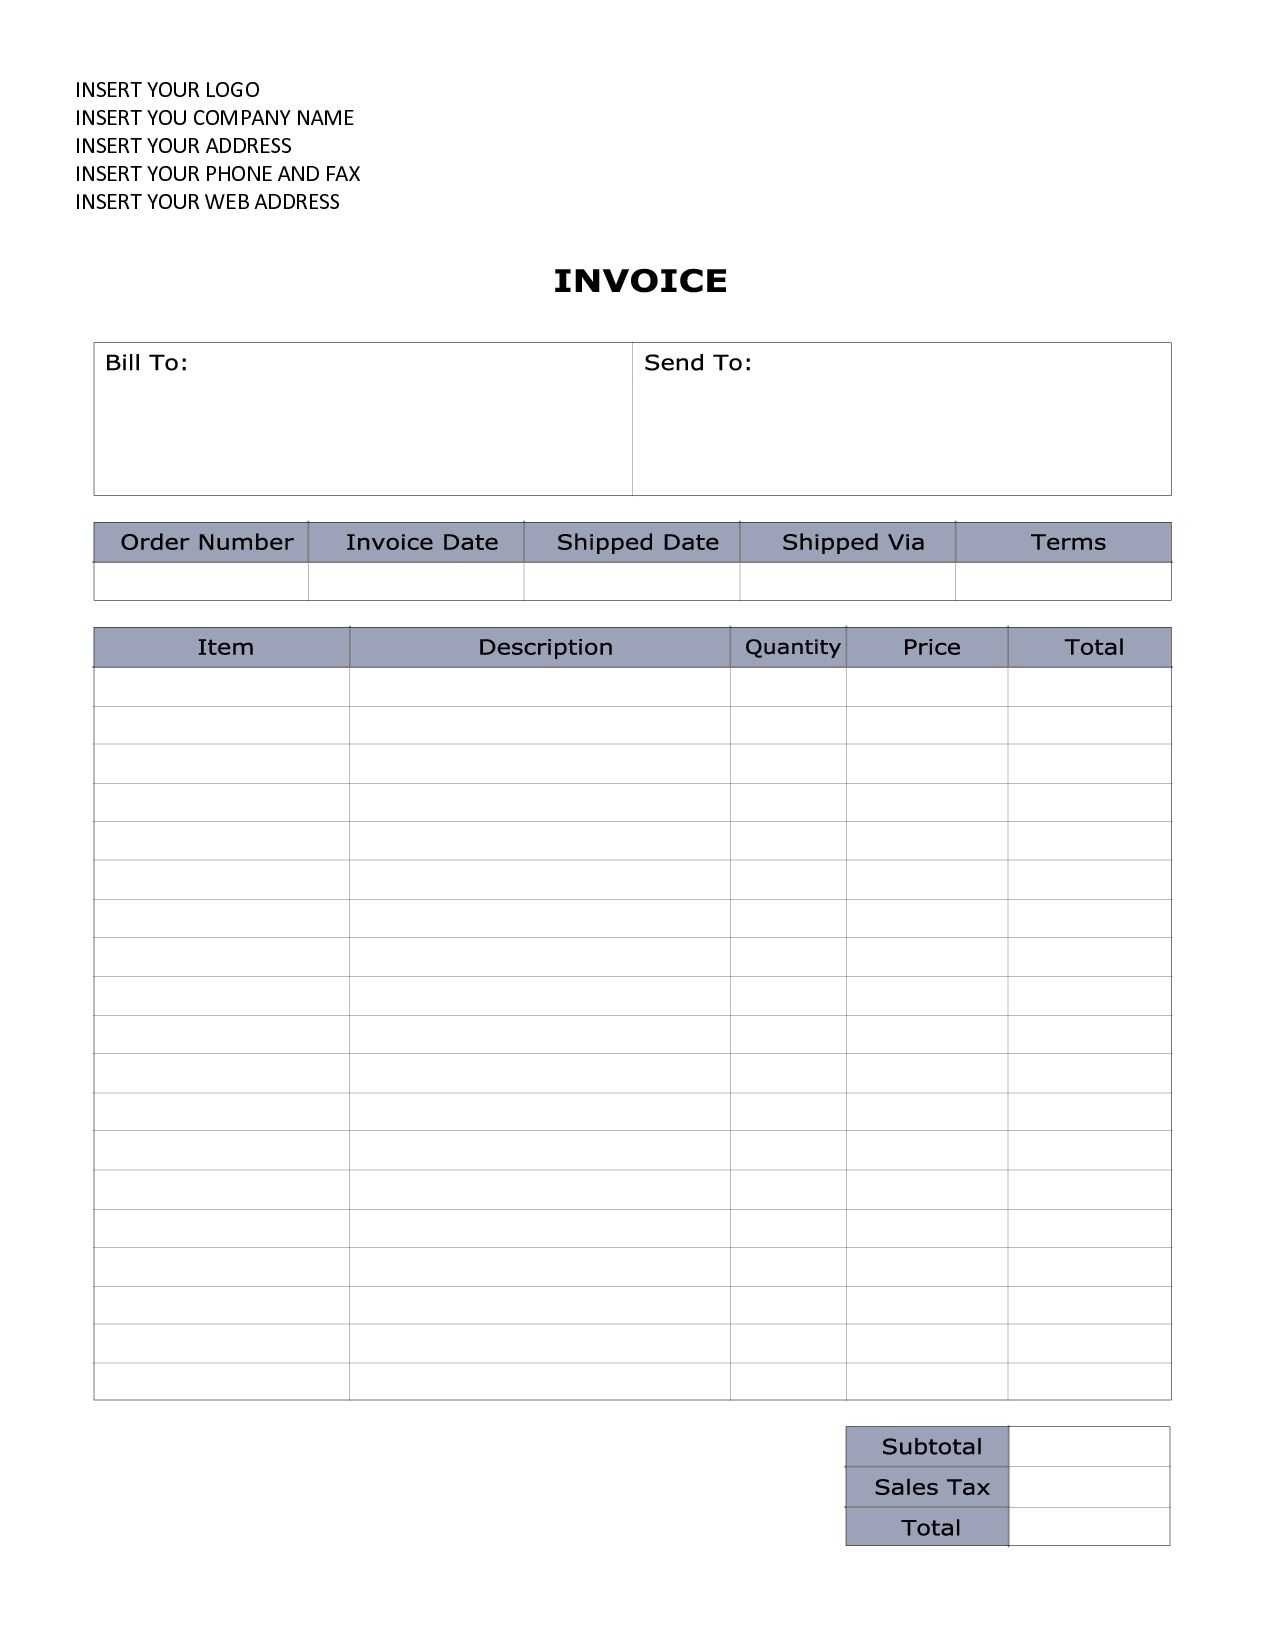 Excel Spreadsheet Invoice Template File Format Tracking With Invoice Template Word 2010